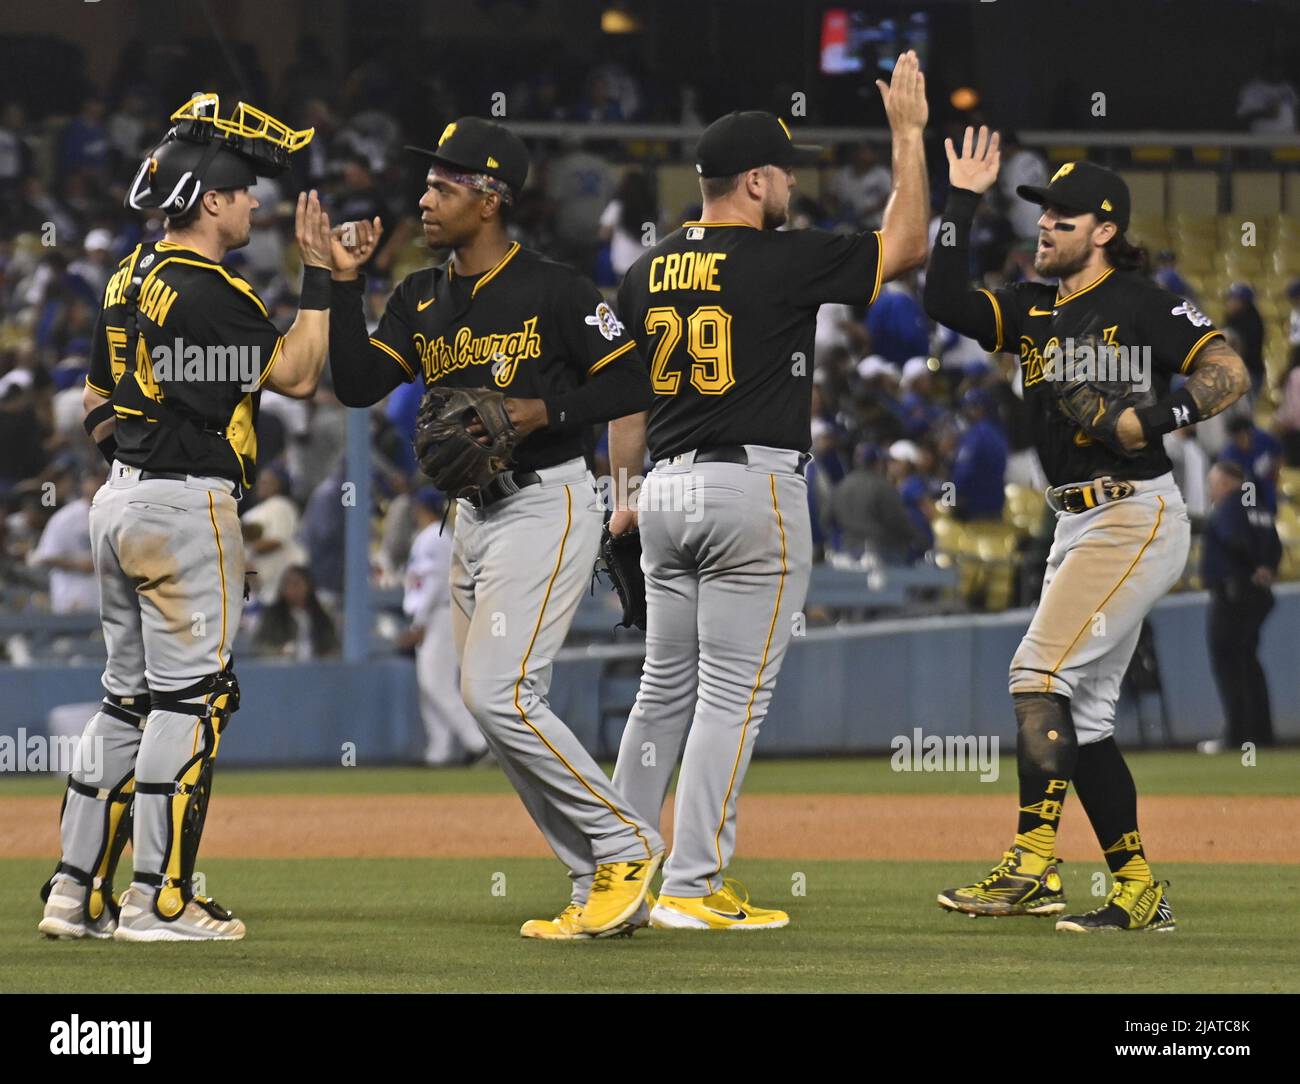 Los Angeles, United States. 01st June, 2022. Pittsburgh Pirates relief pitcher Will Crowe (29) celebrates with teammates after defeating the Los Angeles Dodgers to earn his second season save at Dodger Stadium in Los Angeles on Tuesday May 31, 2022. The Prates beat the Dodgers 5-3 for their second series win. Photo by Jim Ruymen/UPI Credit: UPI/Alamy Live News Stock Photo